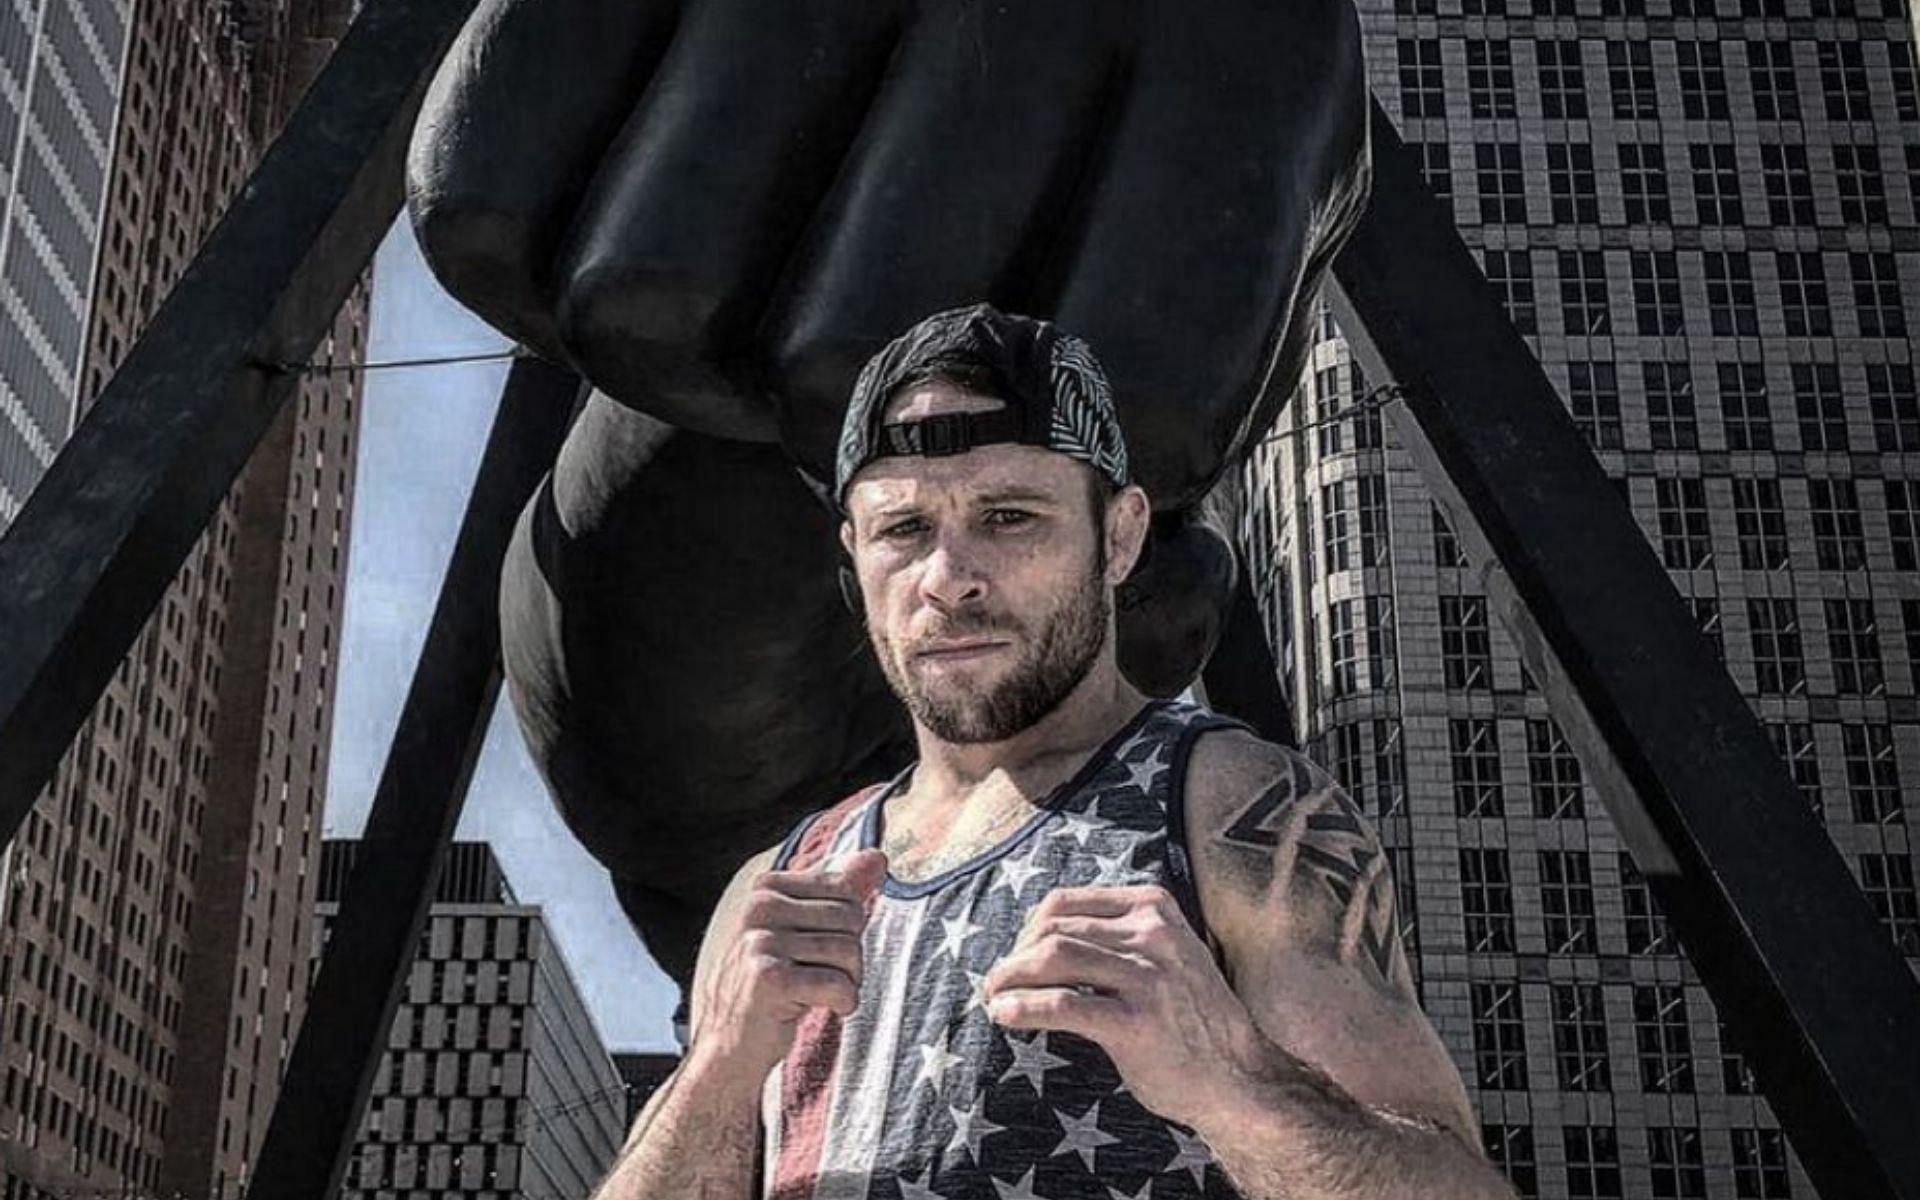 Jarred Brooks posing with the Joe Louis fist statue (Image from @the_monkeygod Instagram)